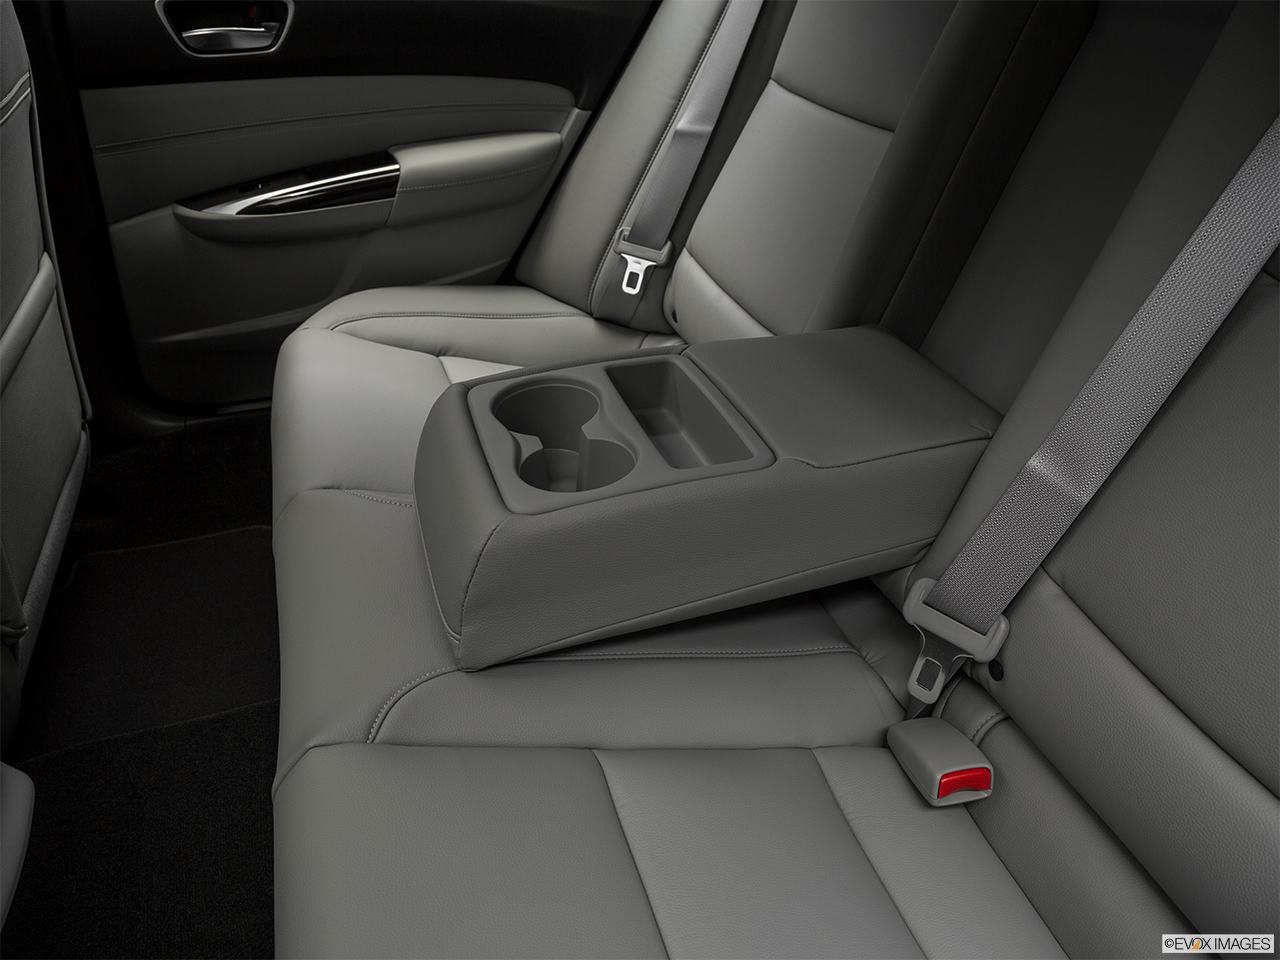 2019 Acura TLX 2.4 8-DCT P-AWS Rear center console with closed lid from driver's side looking down. 